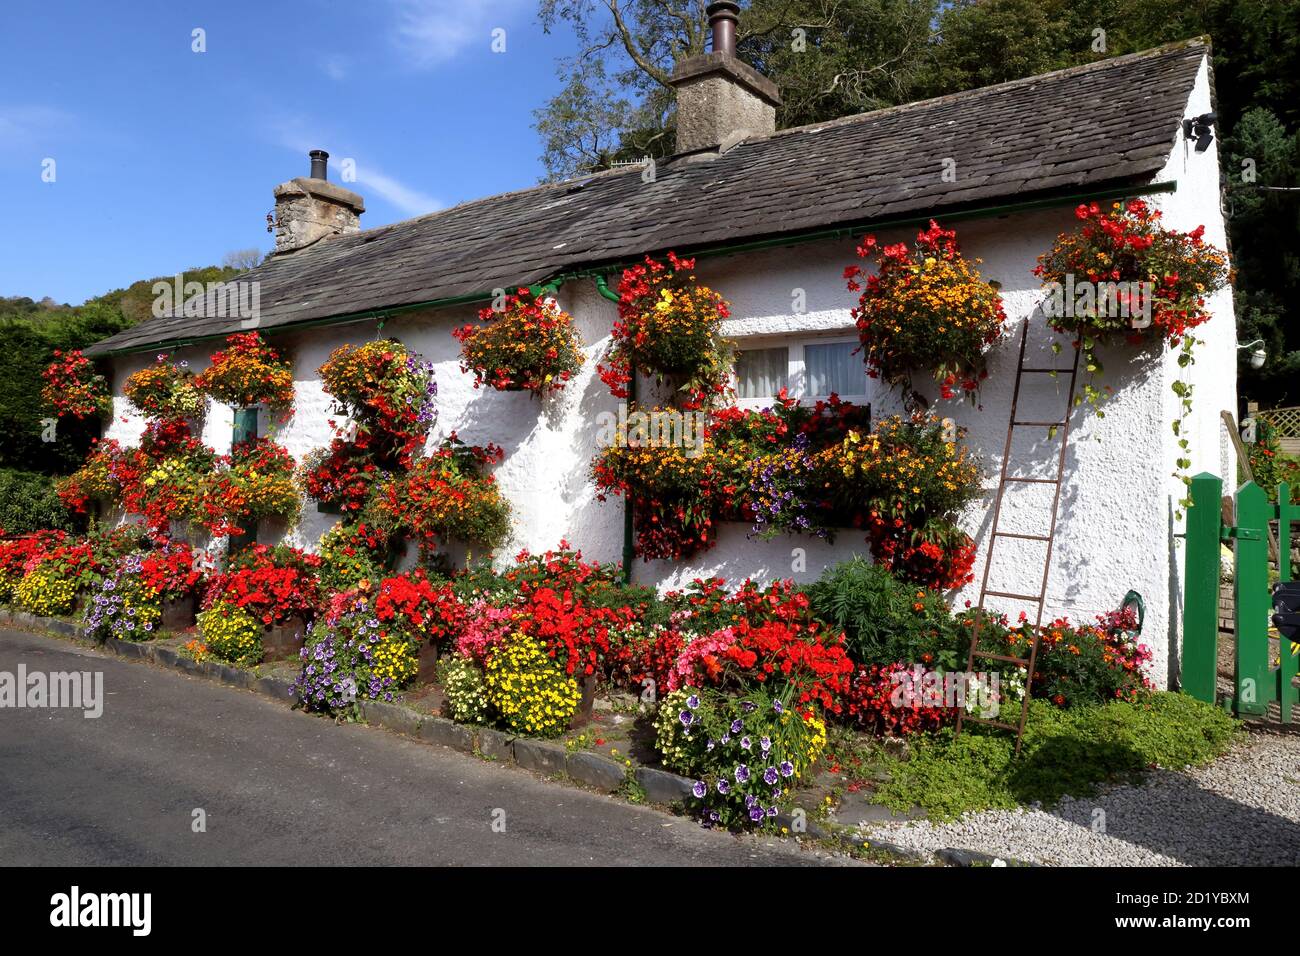 Country cottages adorned with flowers. Stock Photo